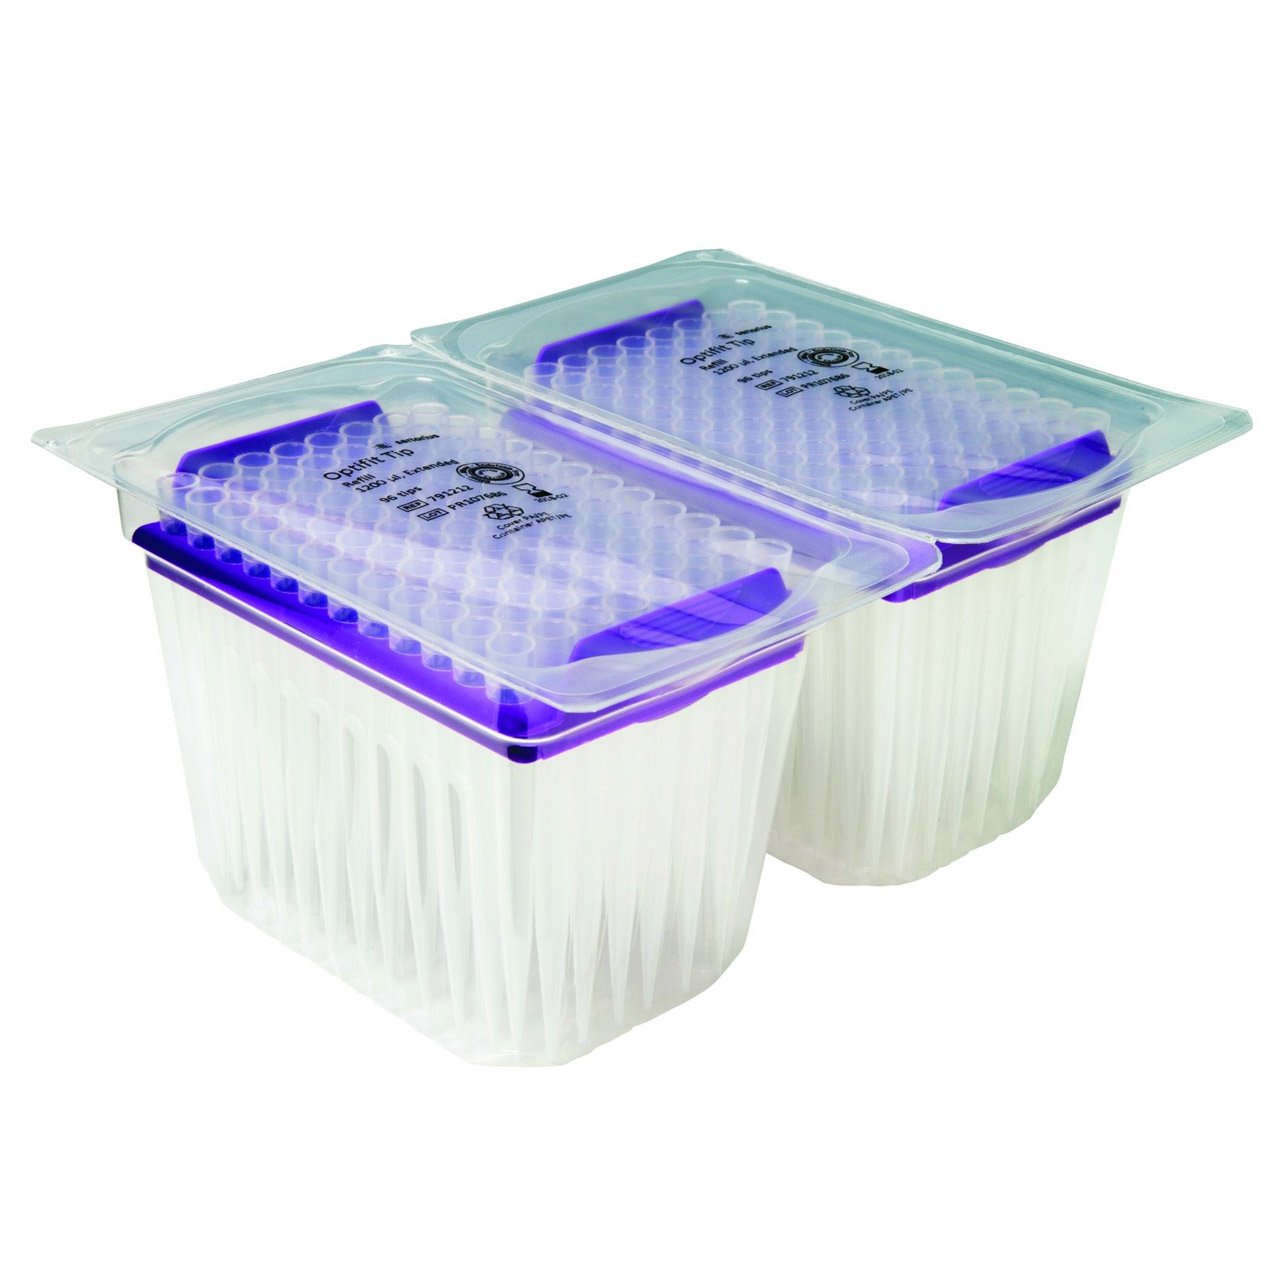 Tip 1200,Exended, Refill Pack (10x96) Sterile